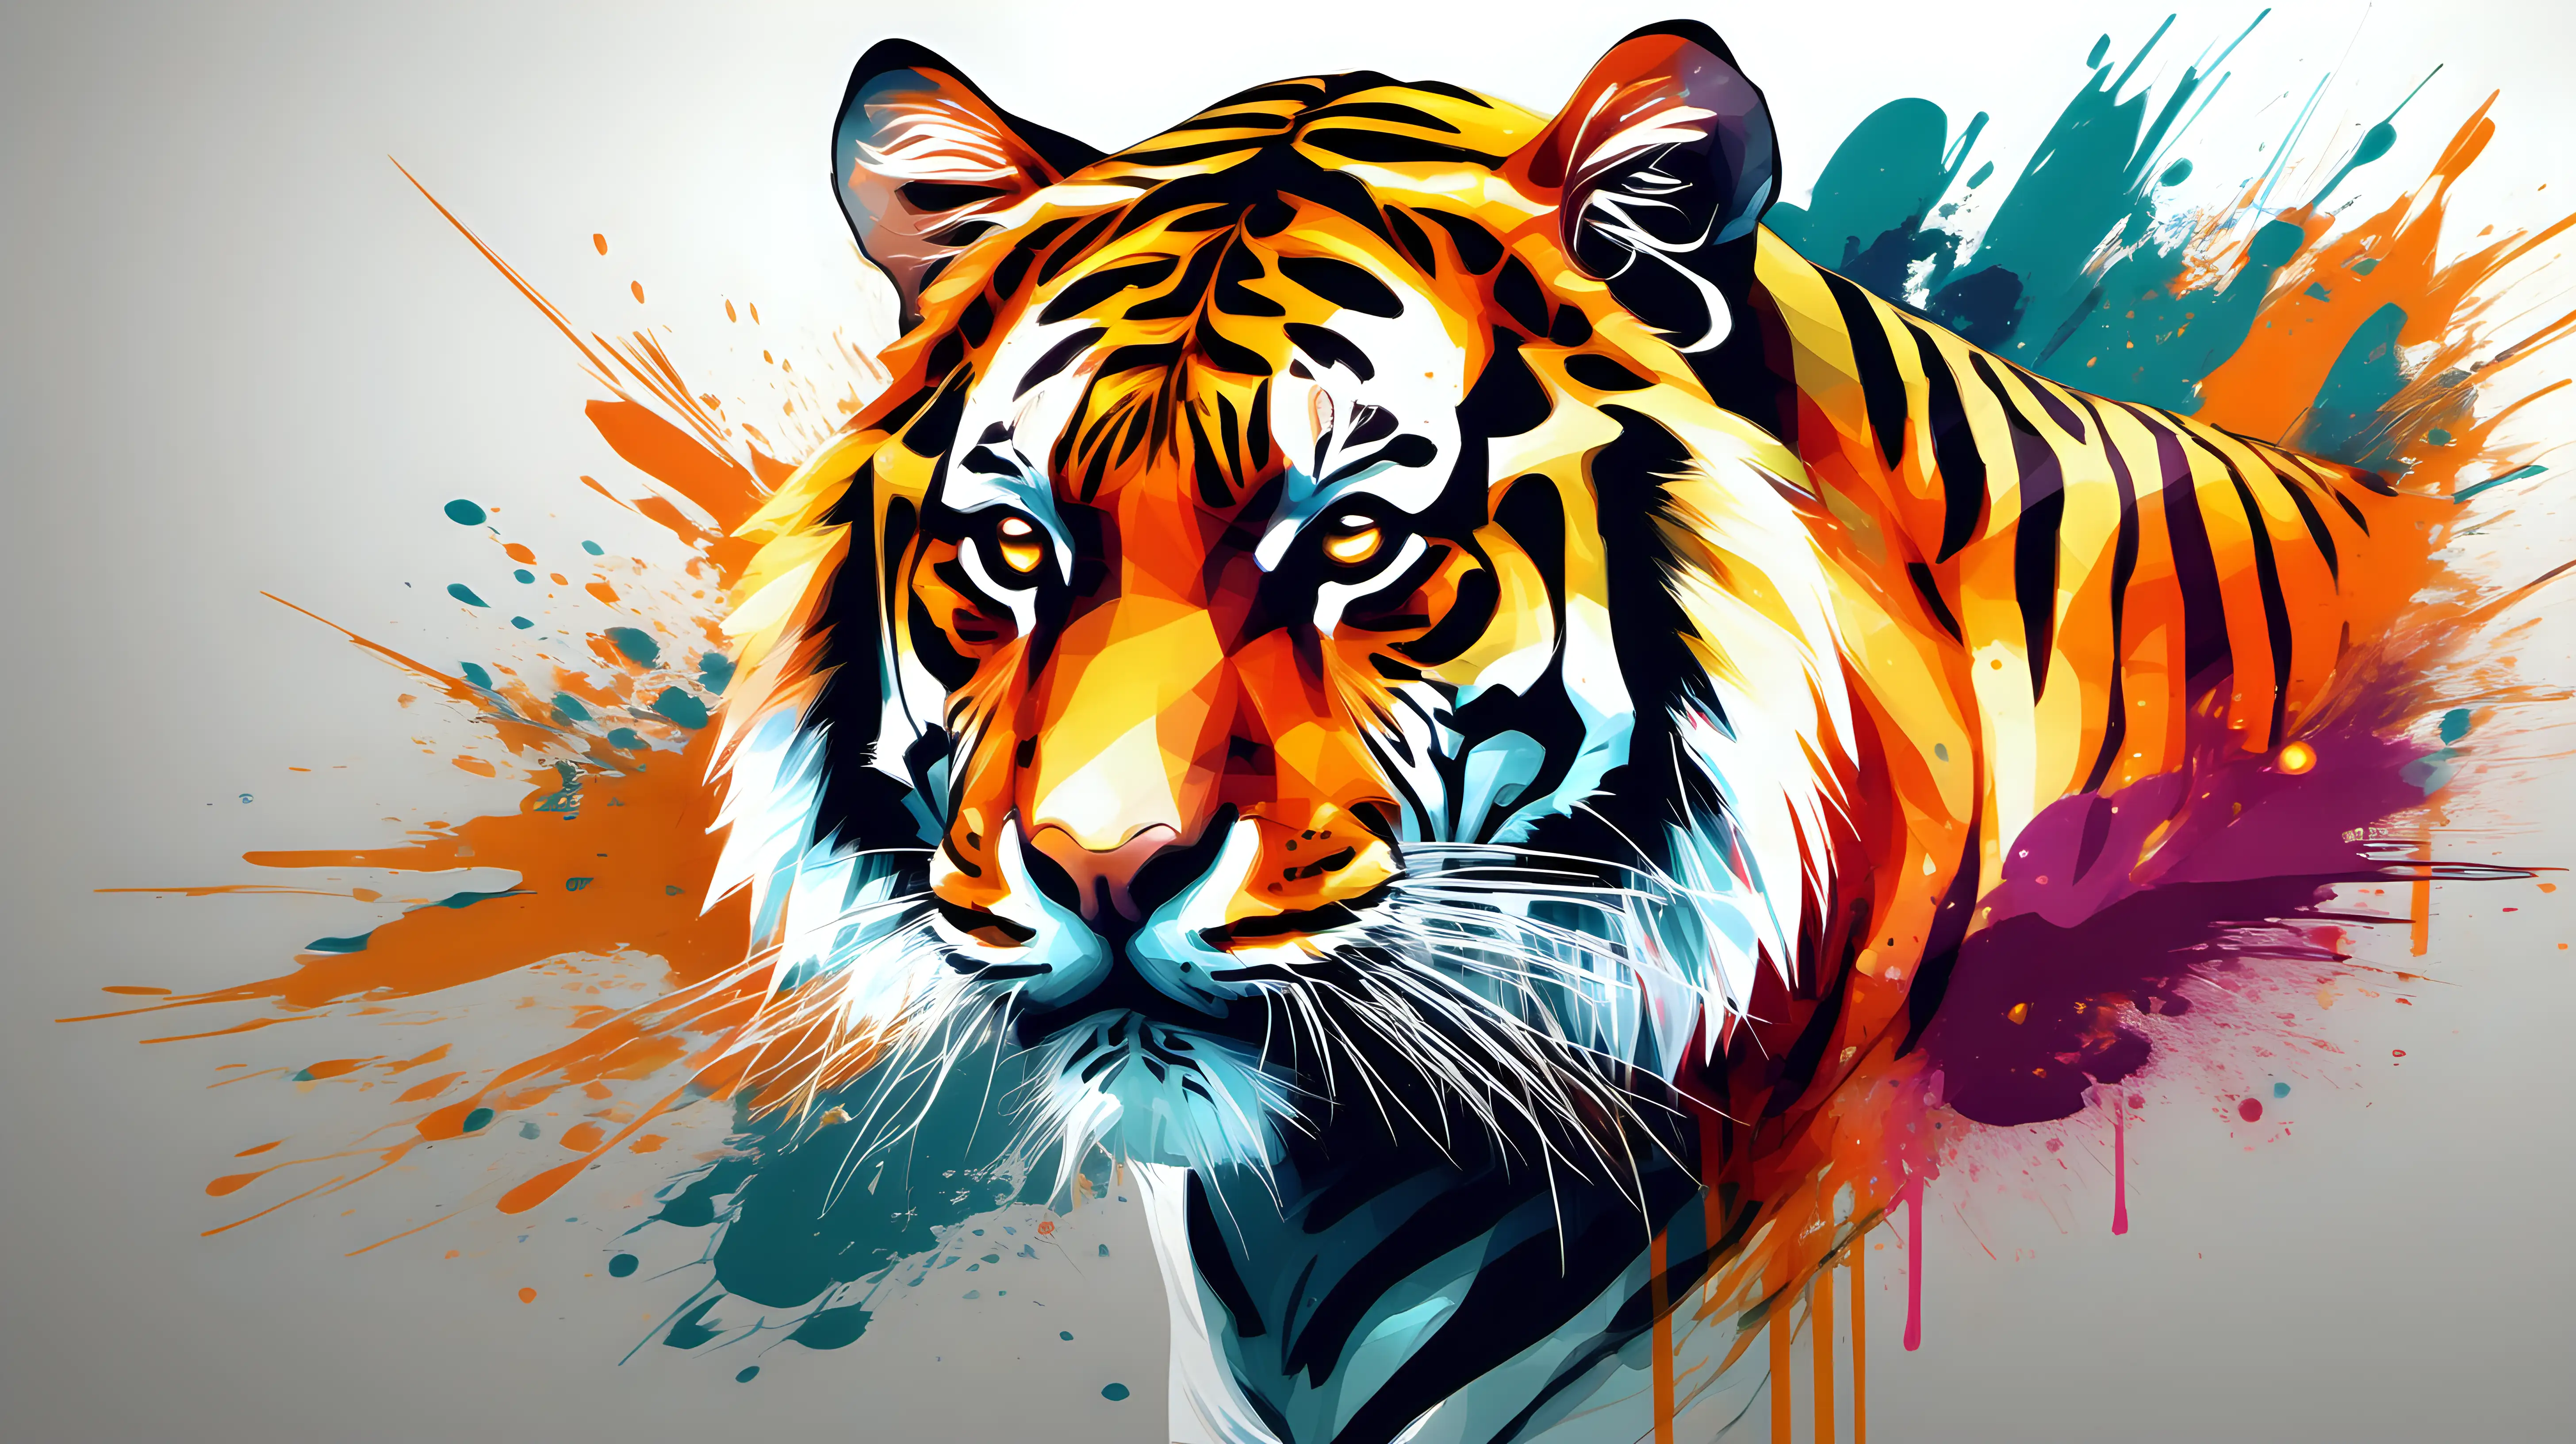 Majestic Tiger Art Vibrant Painterly Illustration with Abstract Brushstrokes